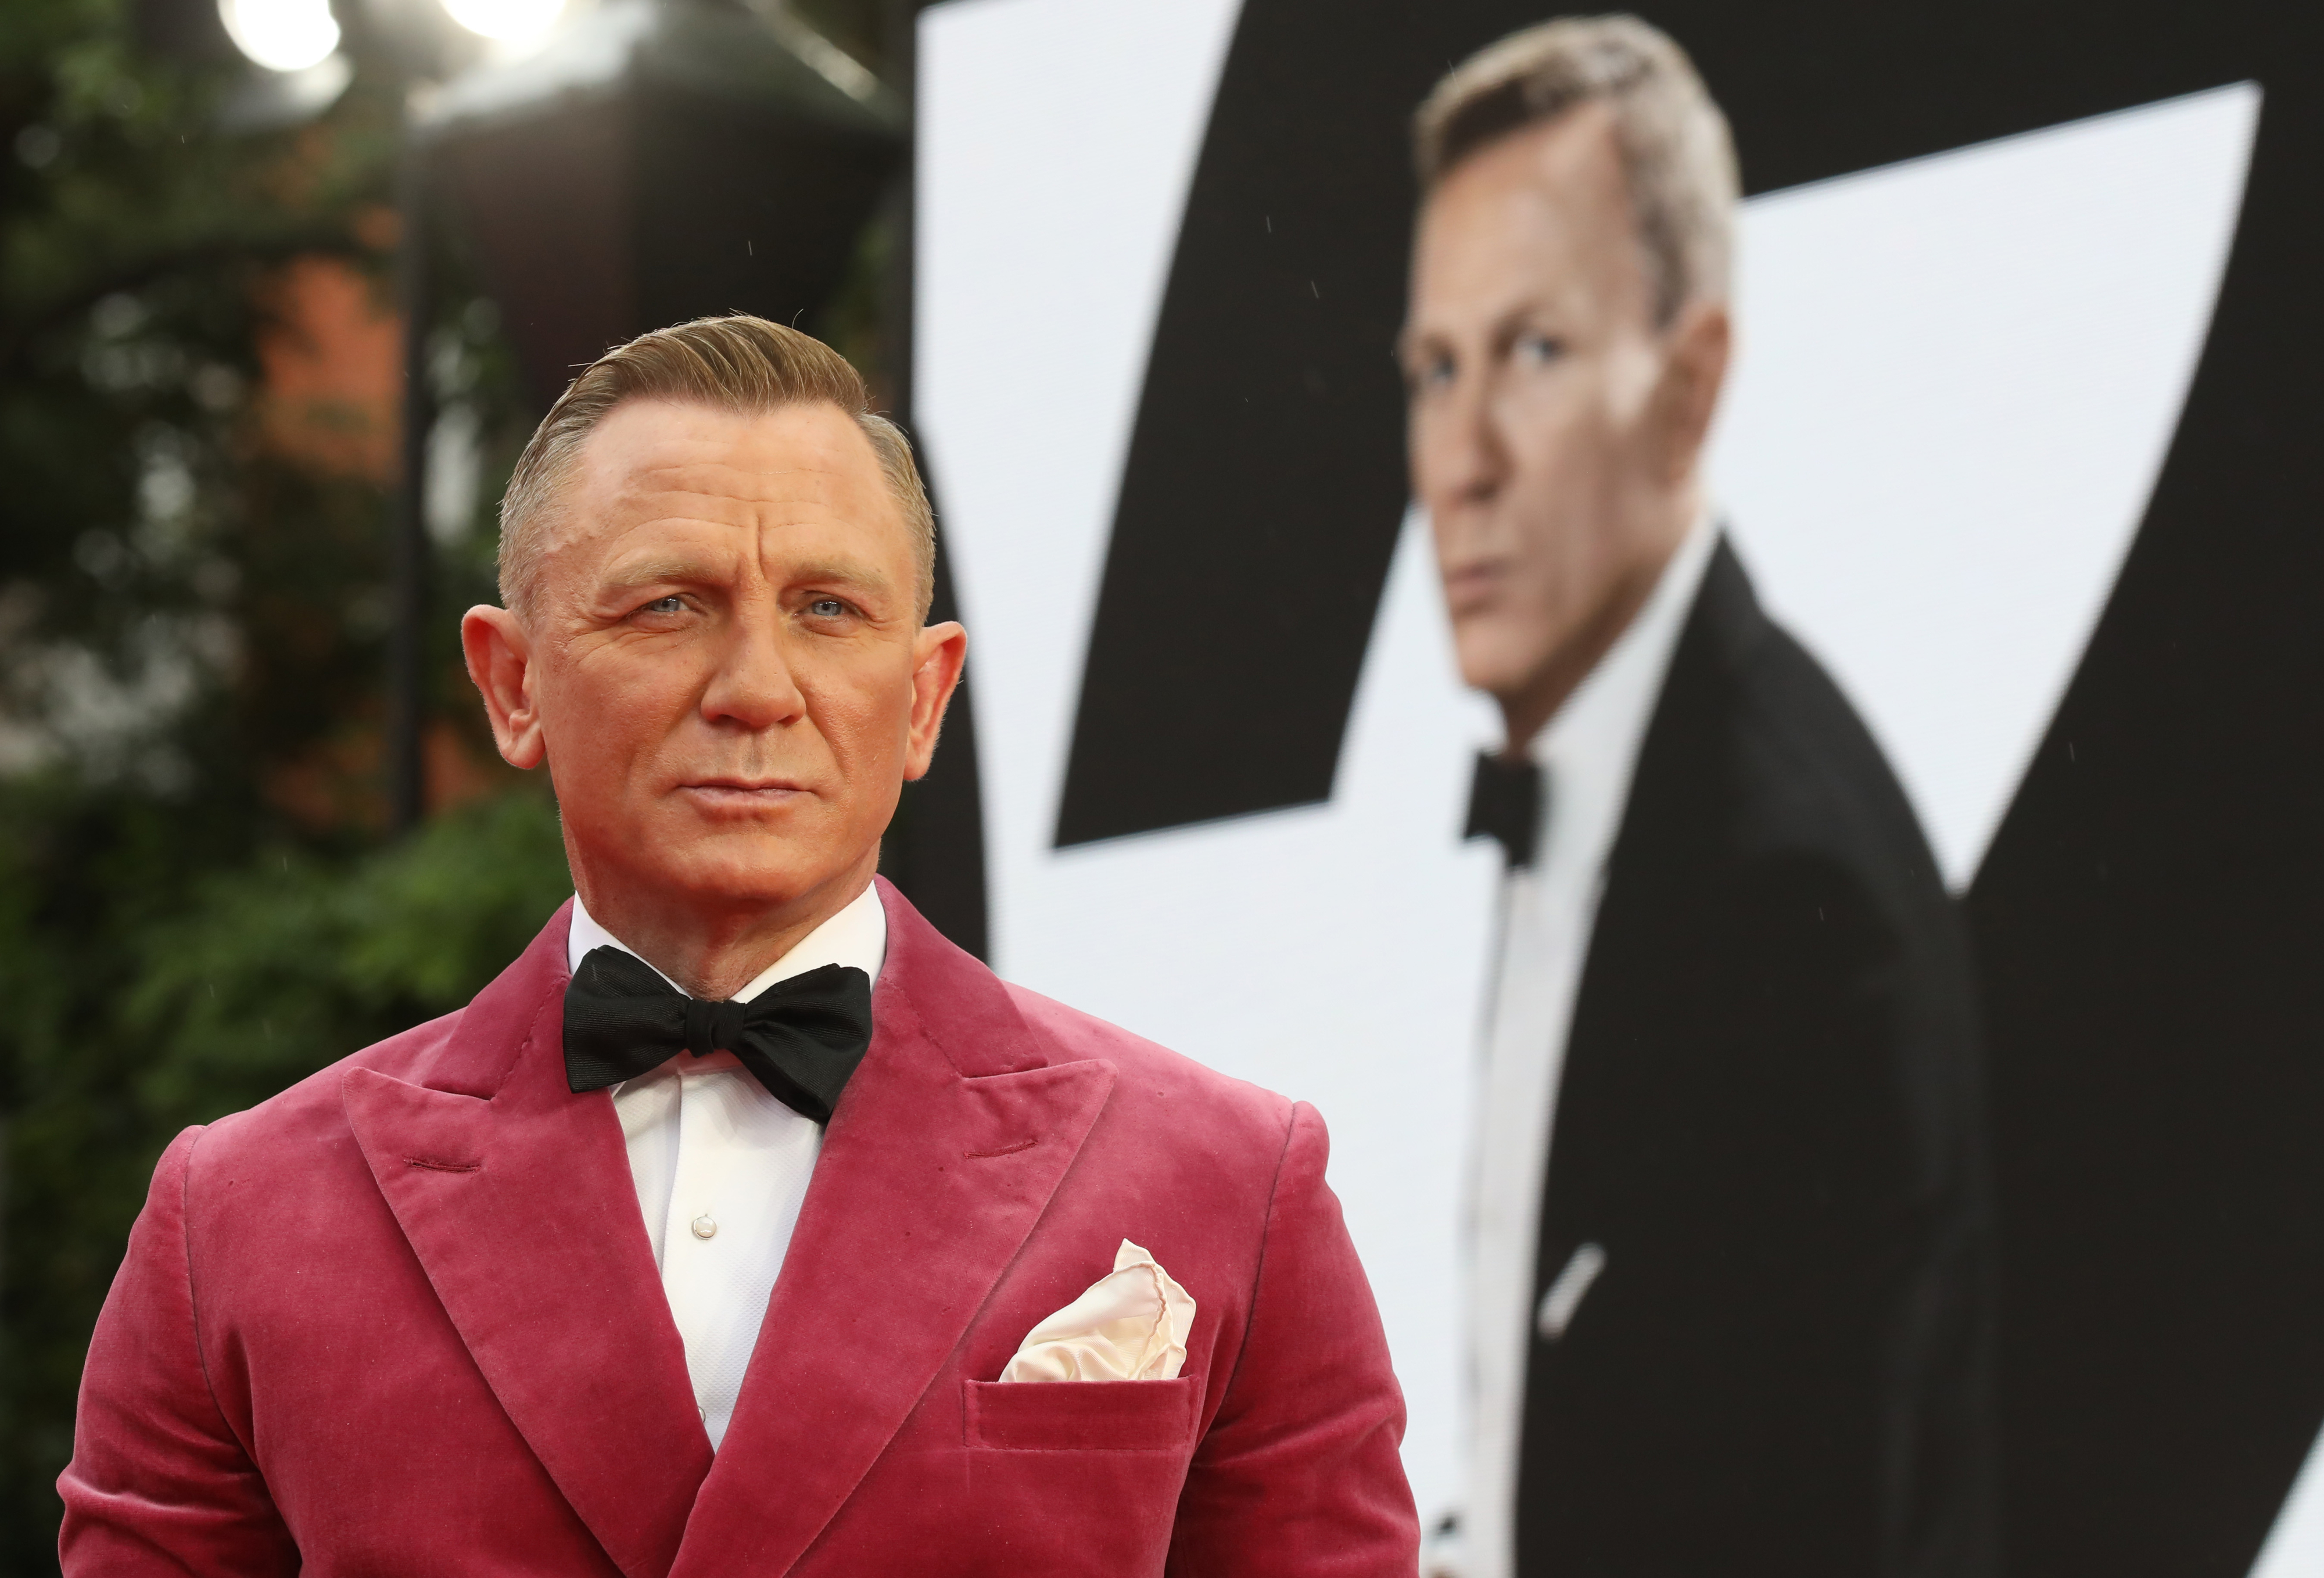 Daniel Craig in a velvet tuxedo with bow tie at a movie premiere, with a Bond poster in the background